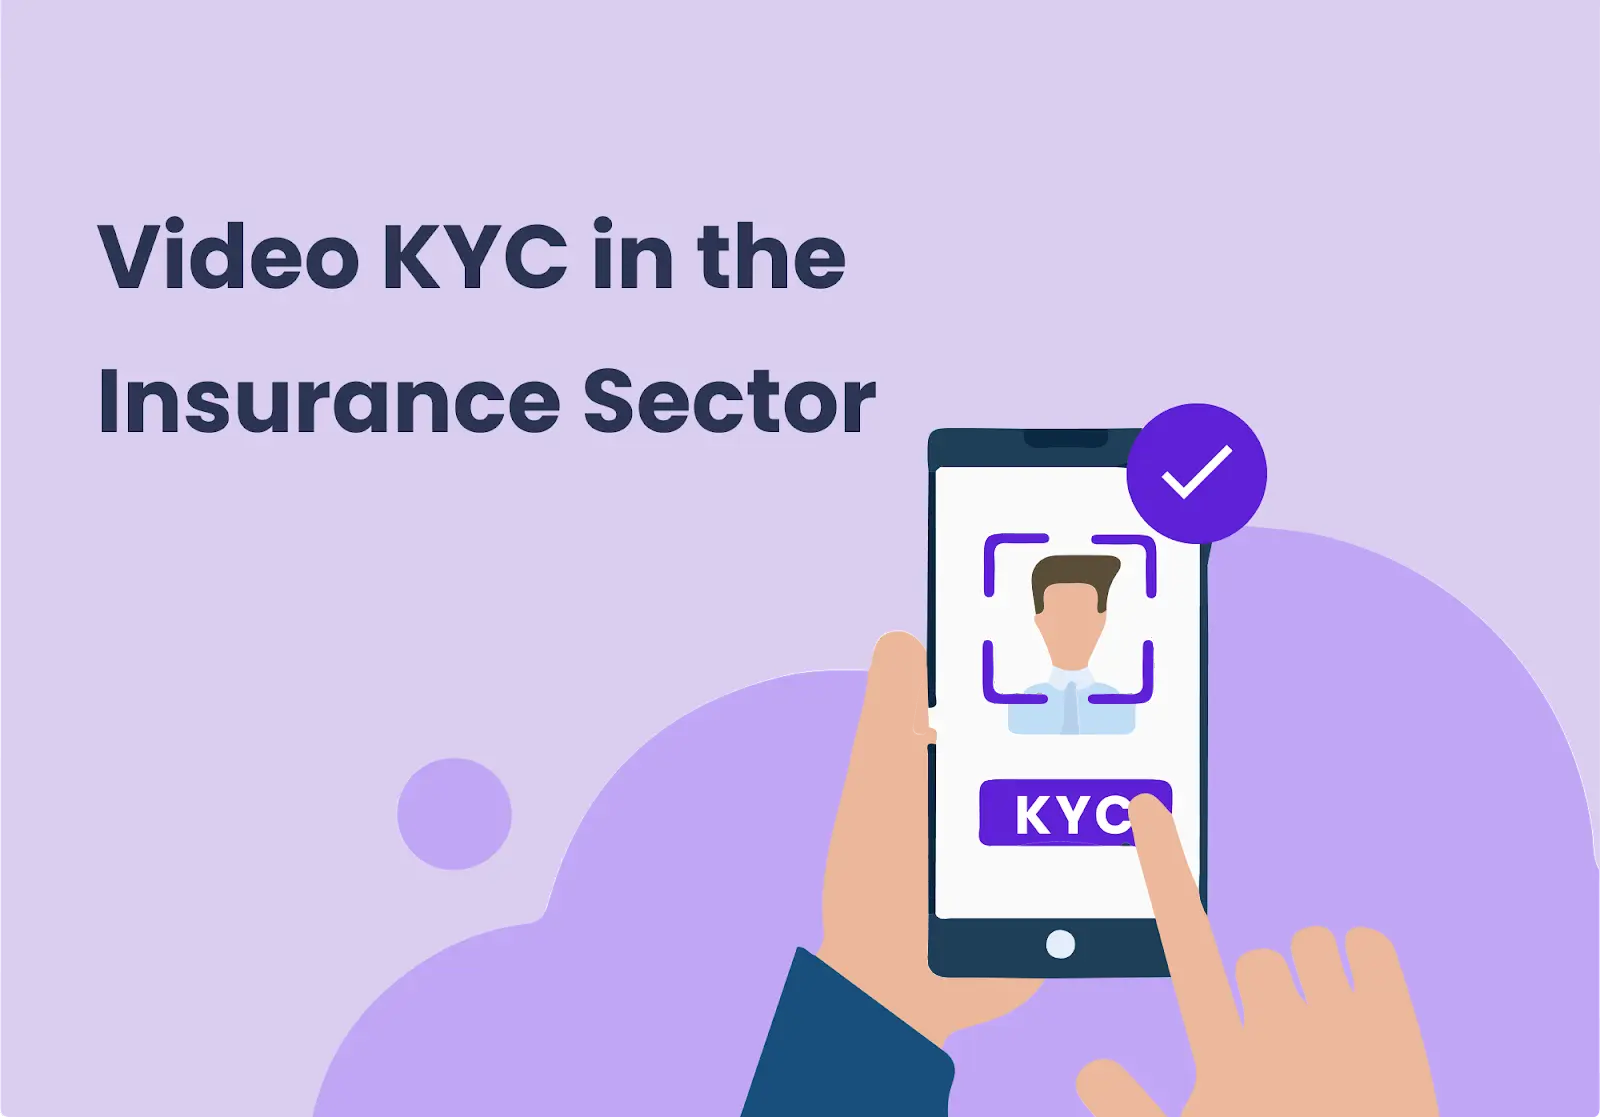  Video KYC in the Insurance Sector